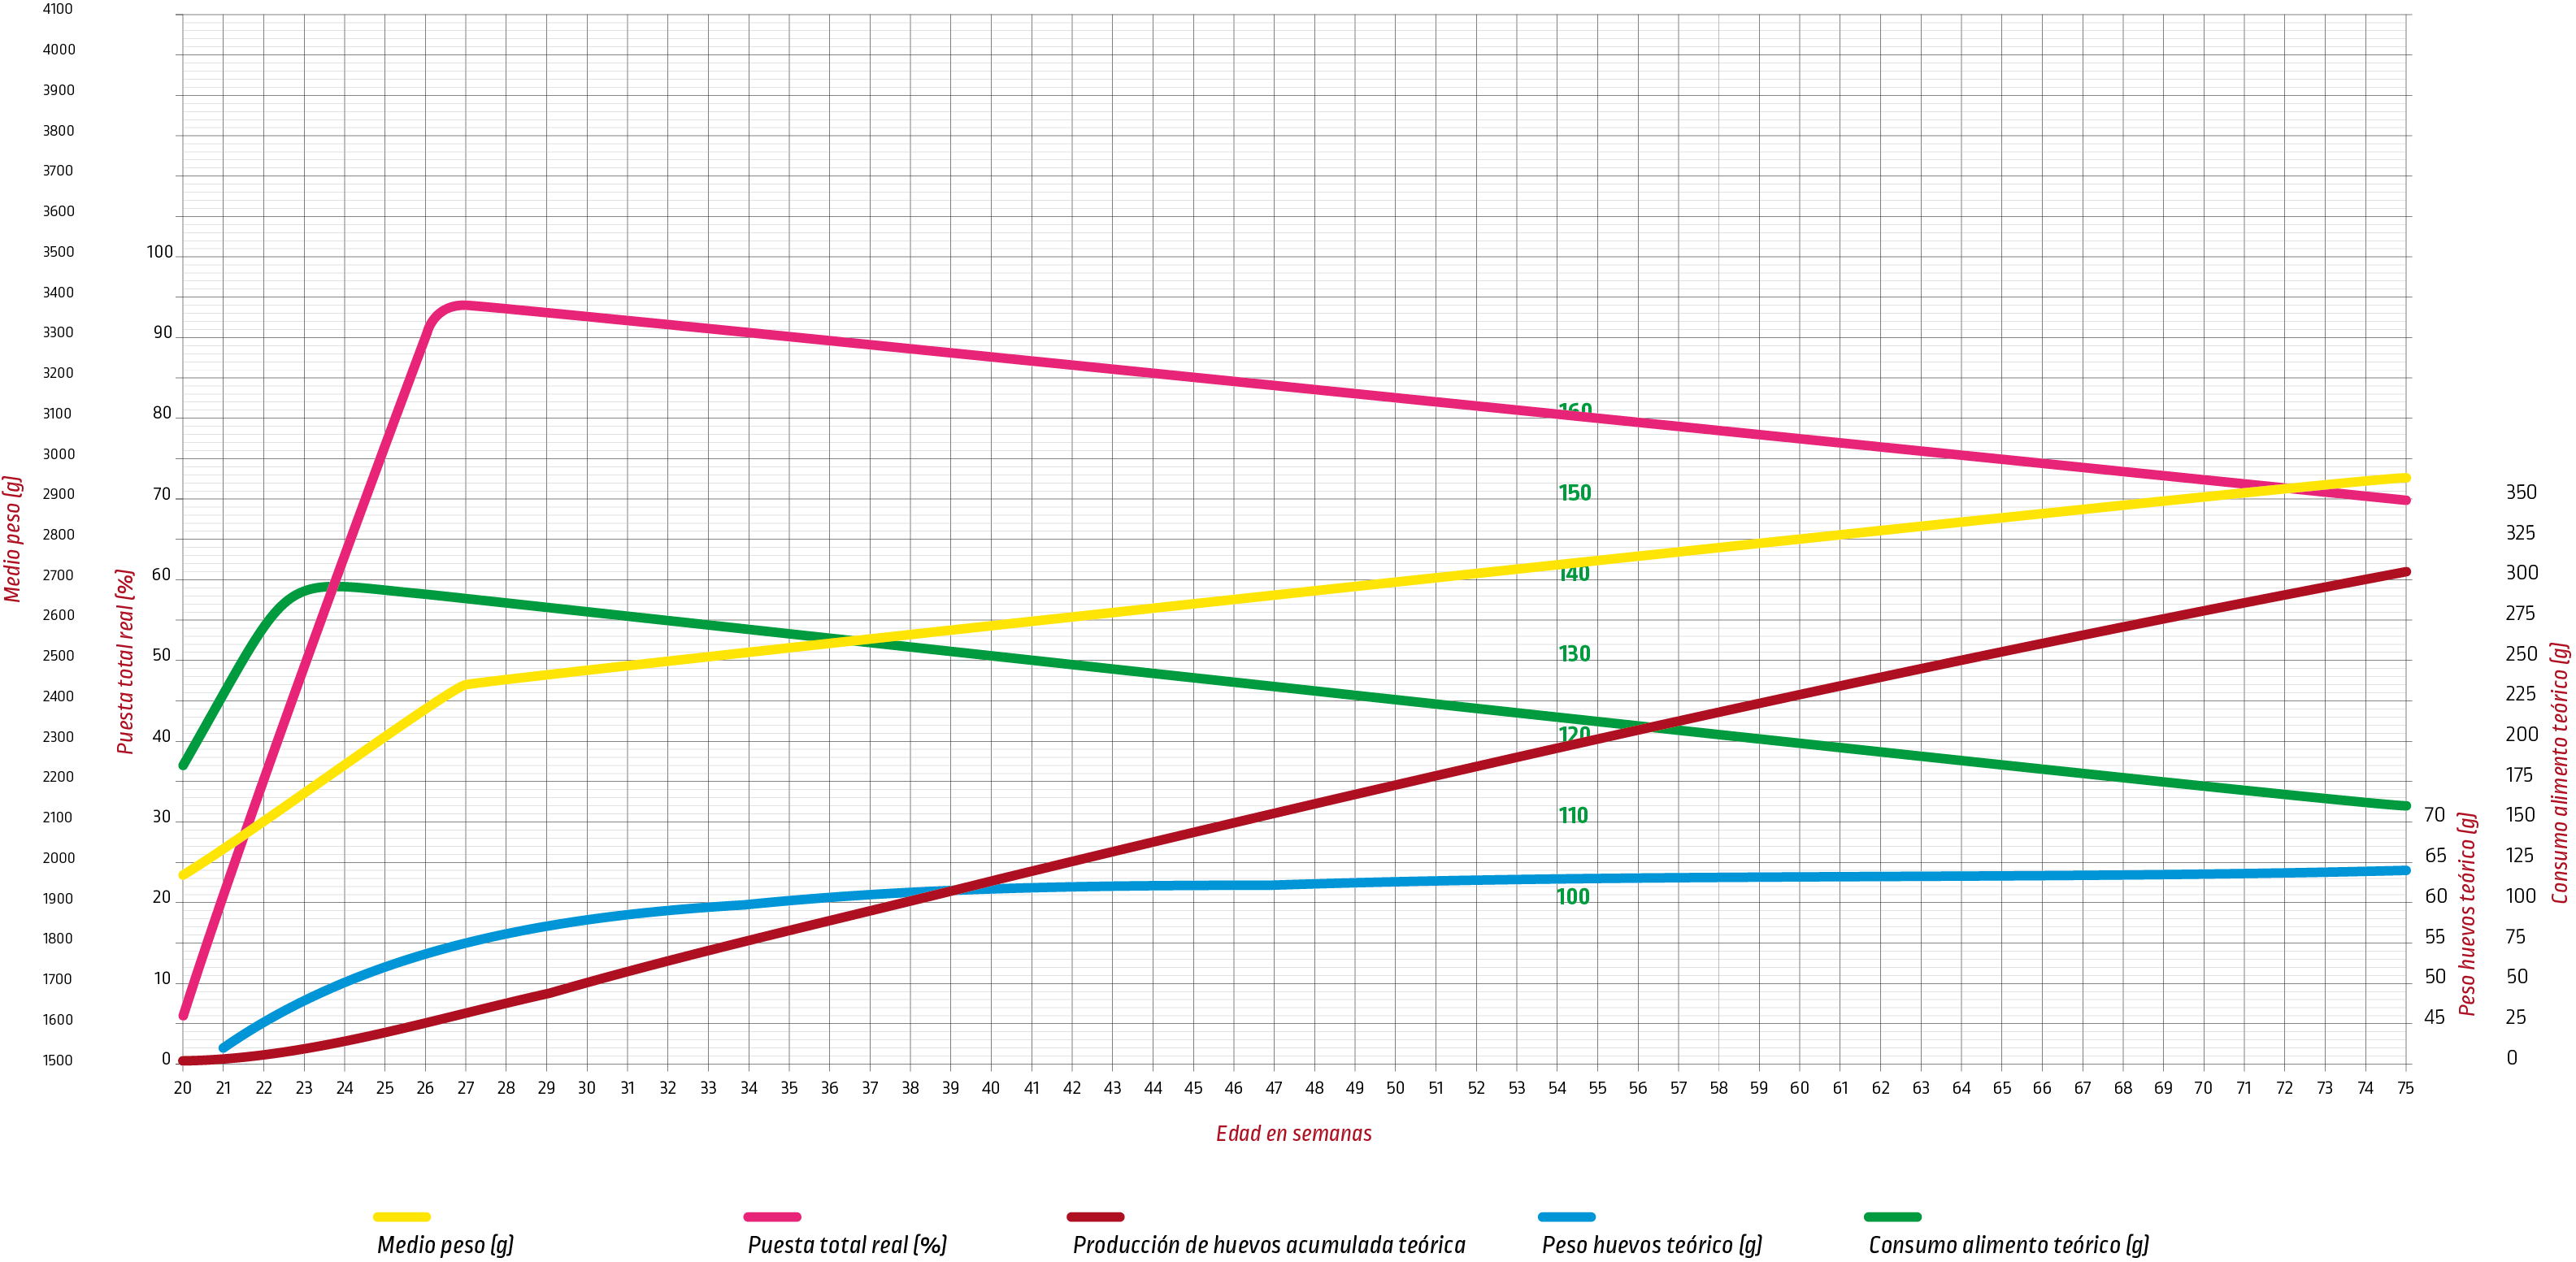 Scarlet_South America_Laying chart.png